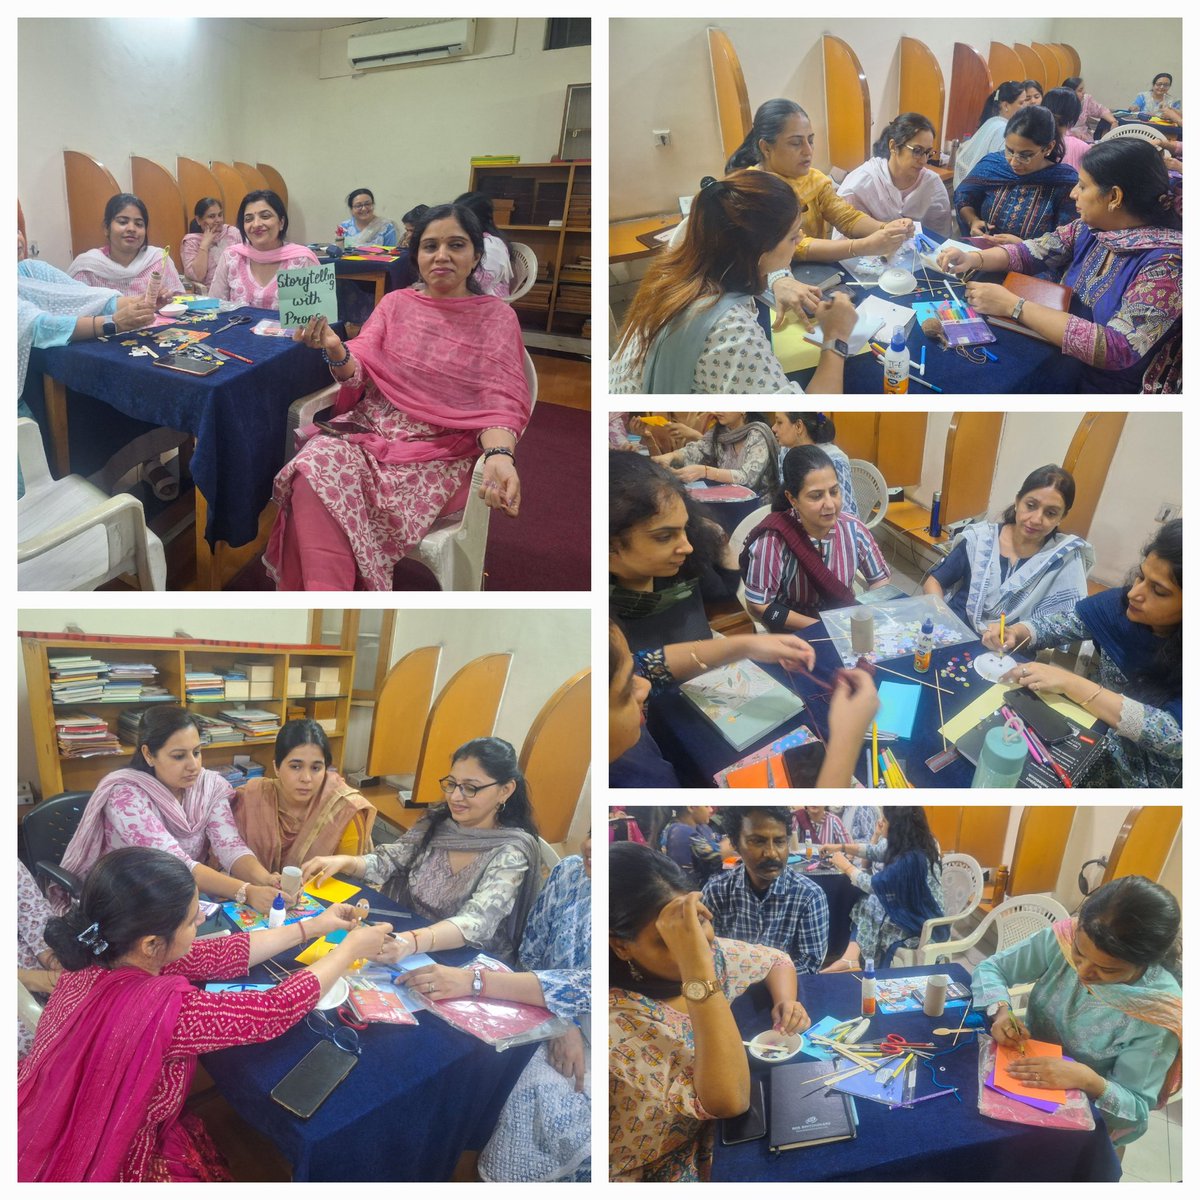 We had opportunity to facilitate engadging workshop on ACTIVE LEARNING. The collective efforts by all participants contributed to its success @PreetiMehra77 @anandpooja17 @DivyaNarula21 thank you to visionaries @y_sanjay @pntduggal @ShandilyaPooja